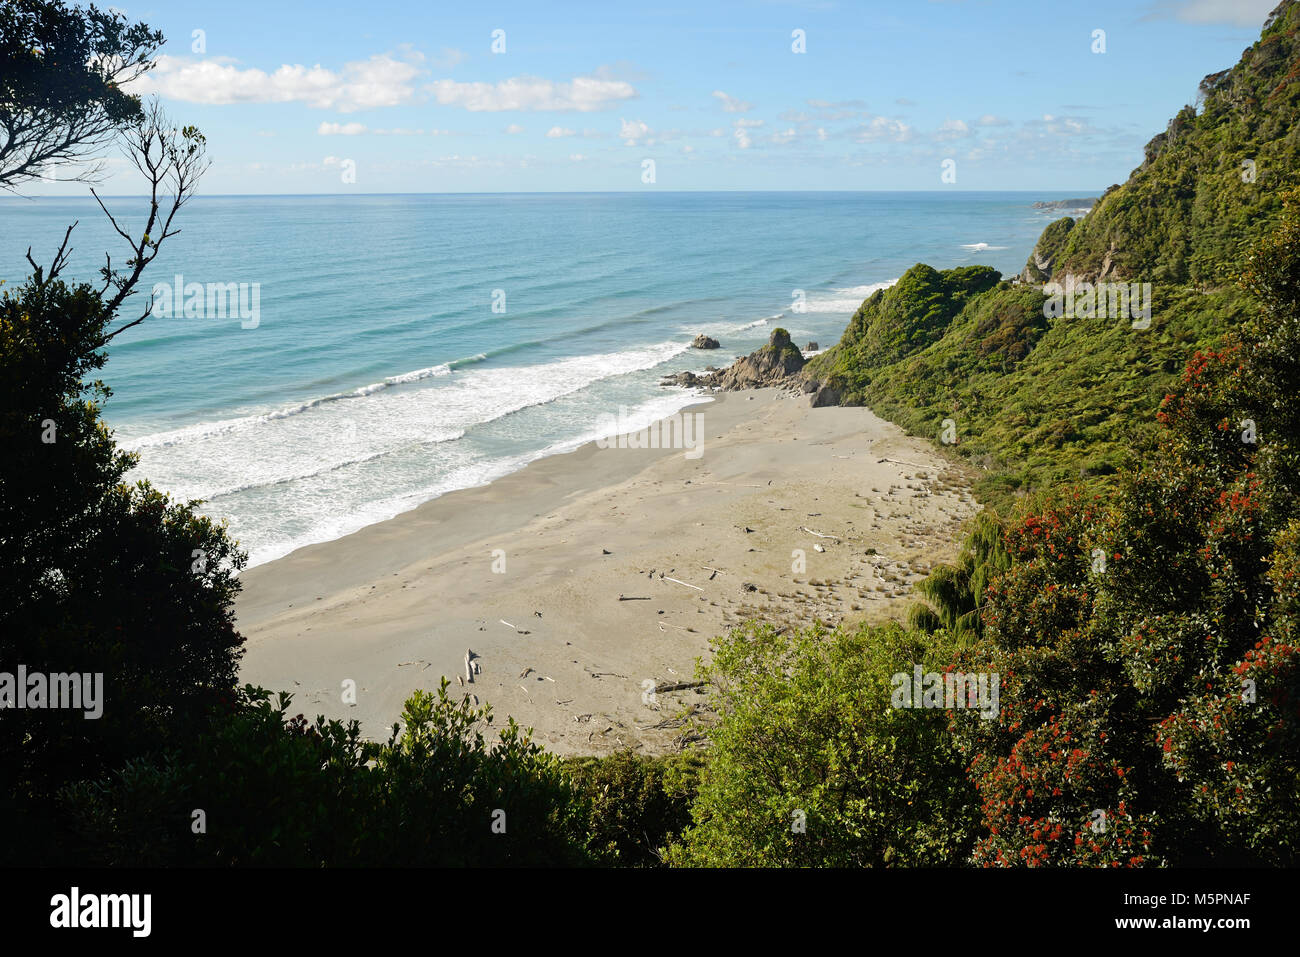 A view from the Coast Road on New Zealand's West Coast north of Greymouth, rated as one of the top ten scenic routes in the world. Stock Photo